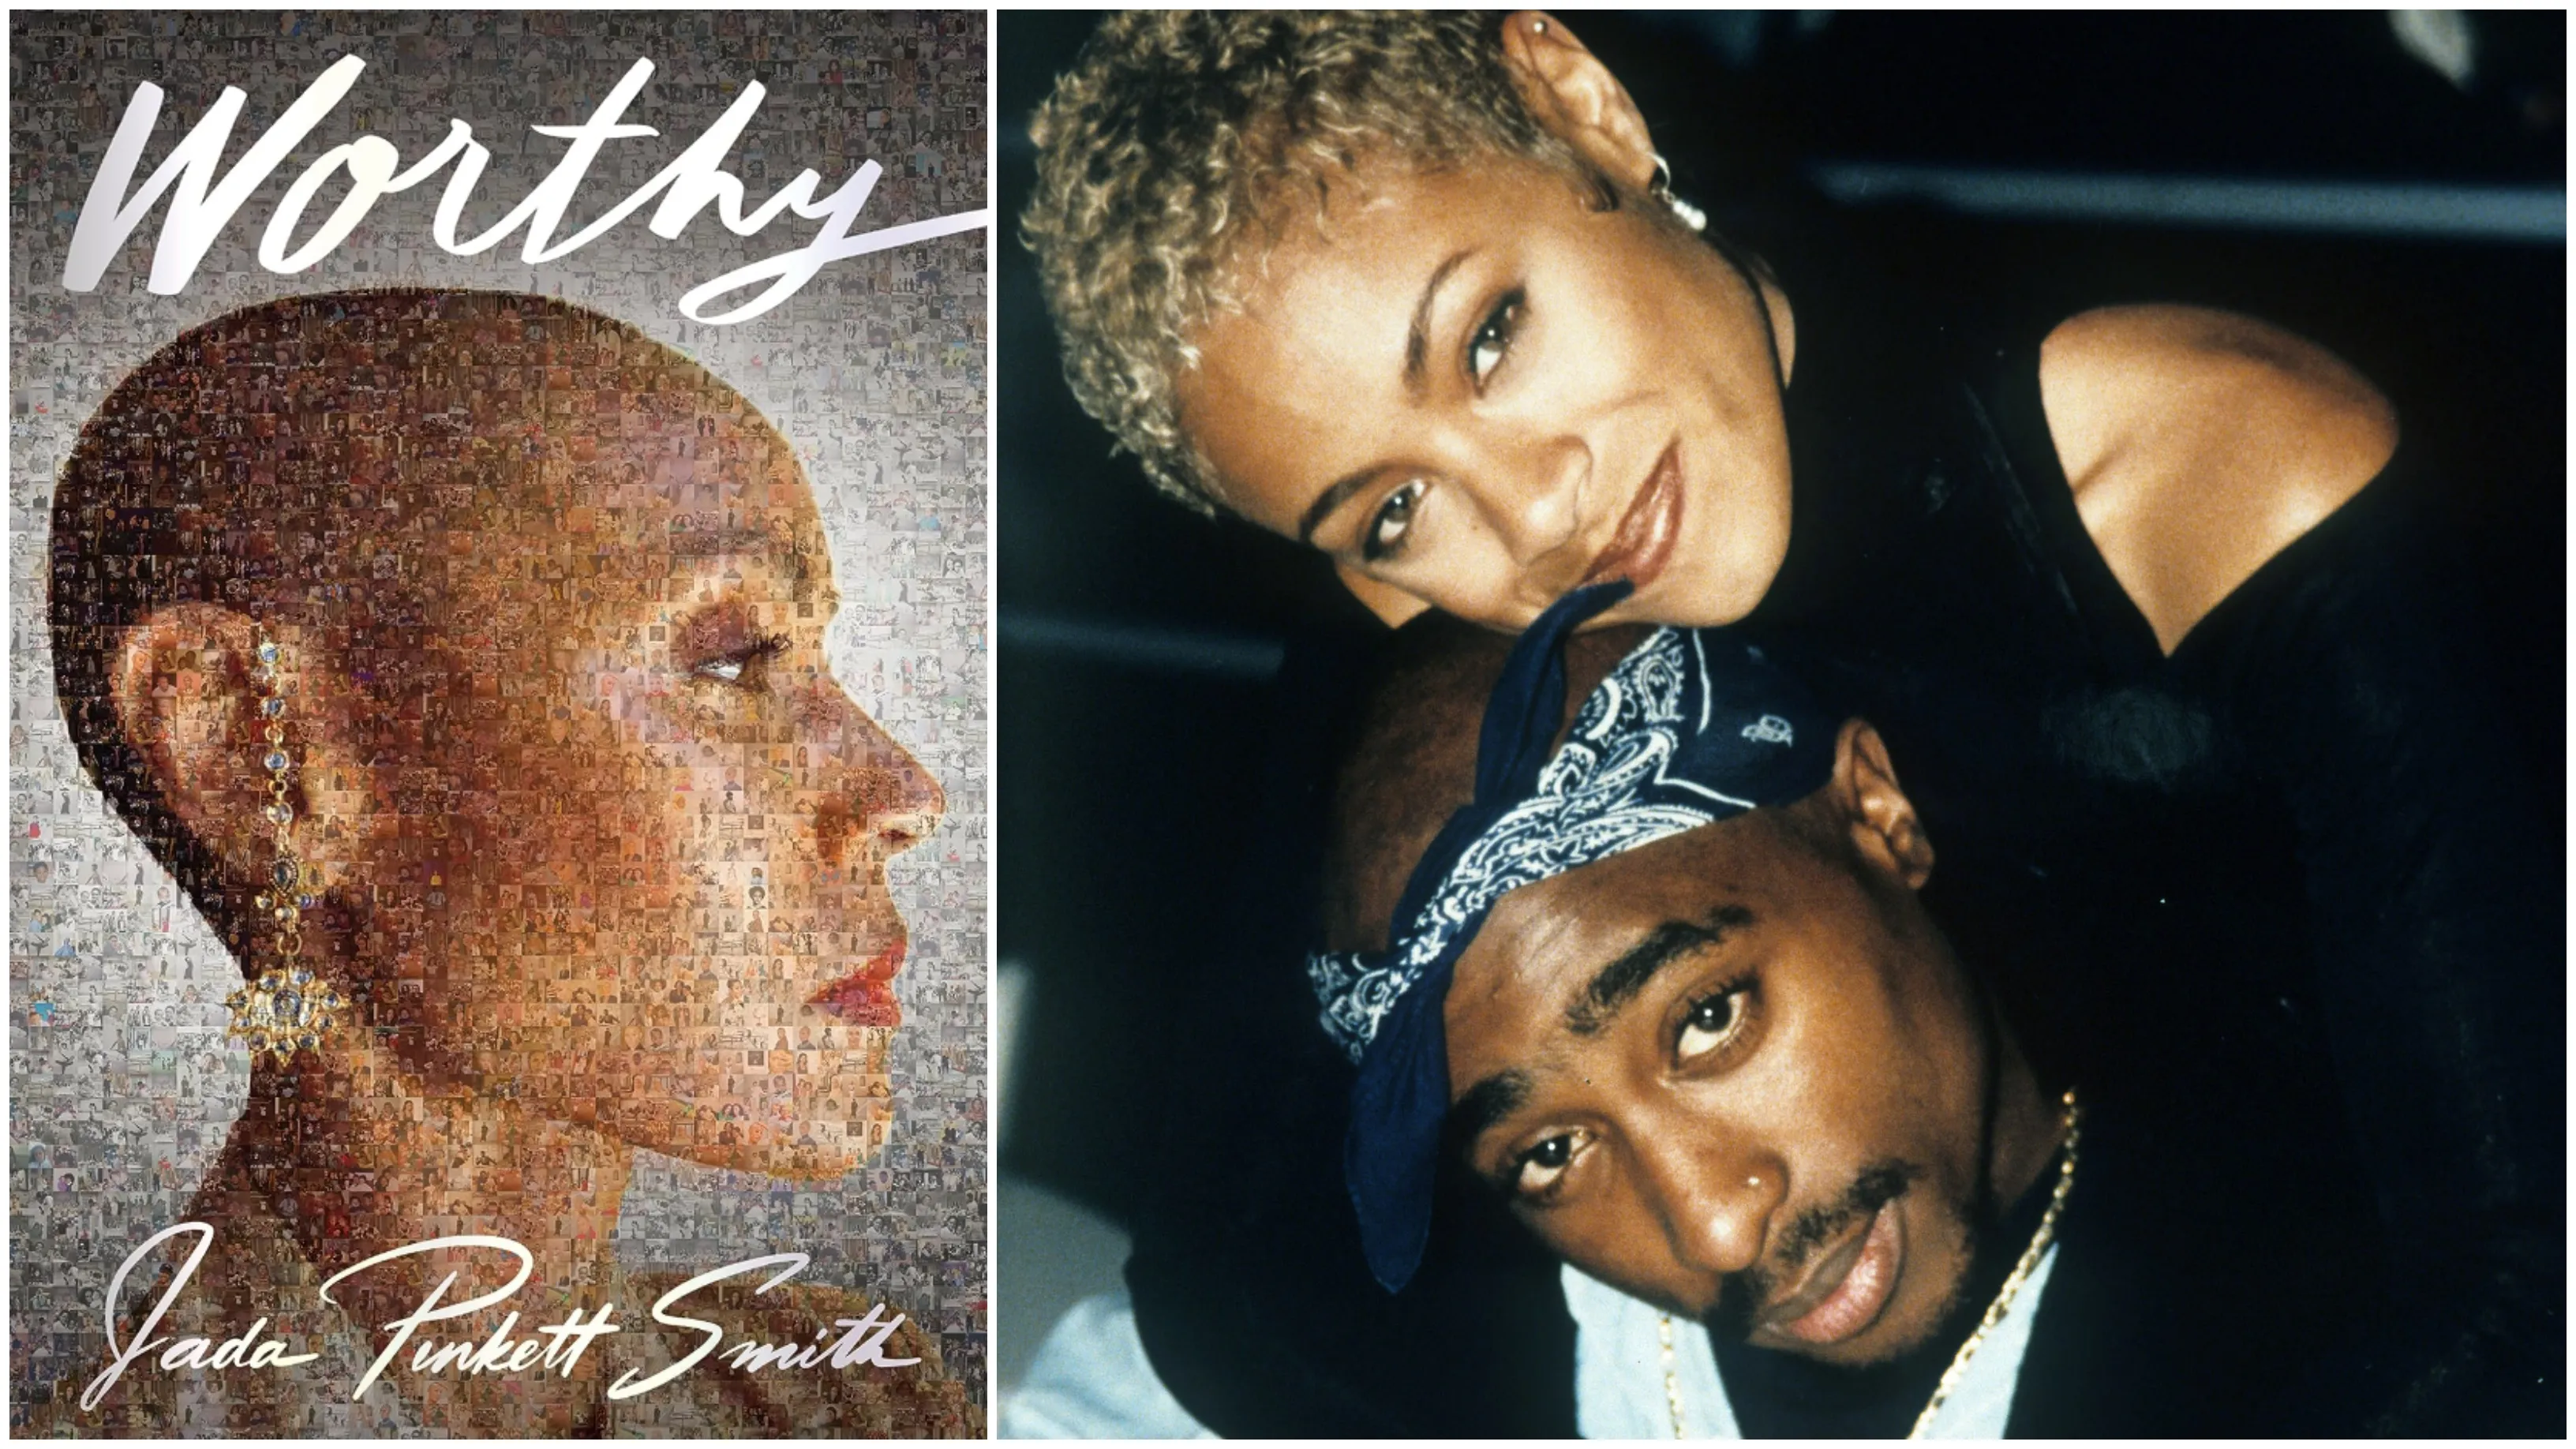 A New Biography Book On Late Rapper Tupac Shakur Explores The Friendship  Between Him And Jada Pinkett Smith - NovelPro Junkie